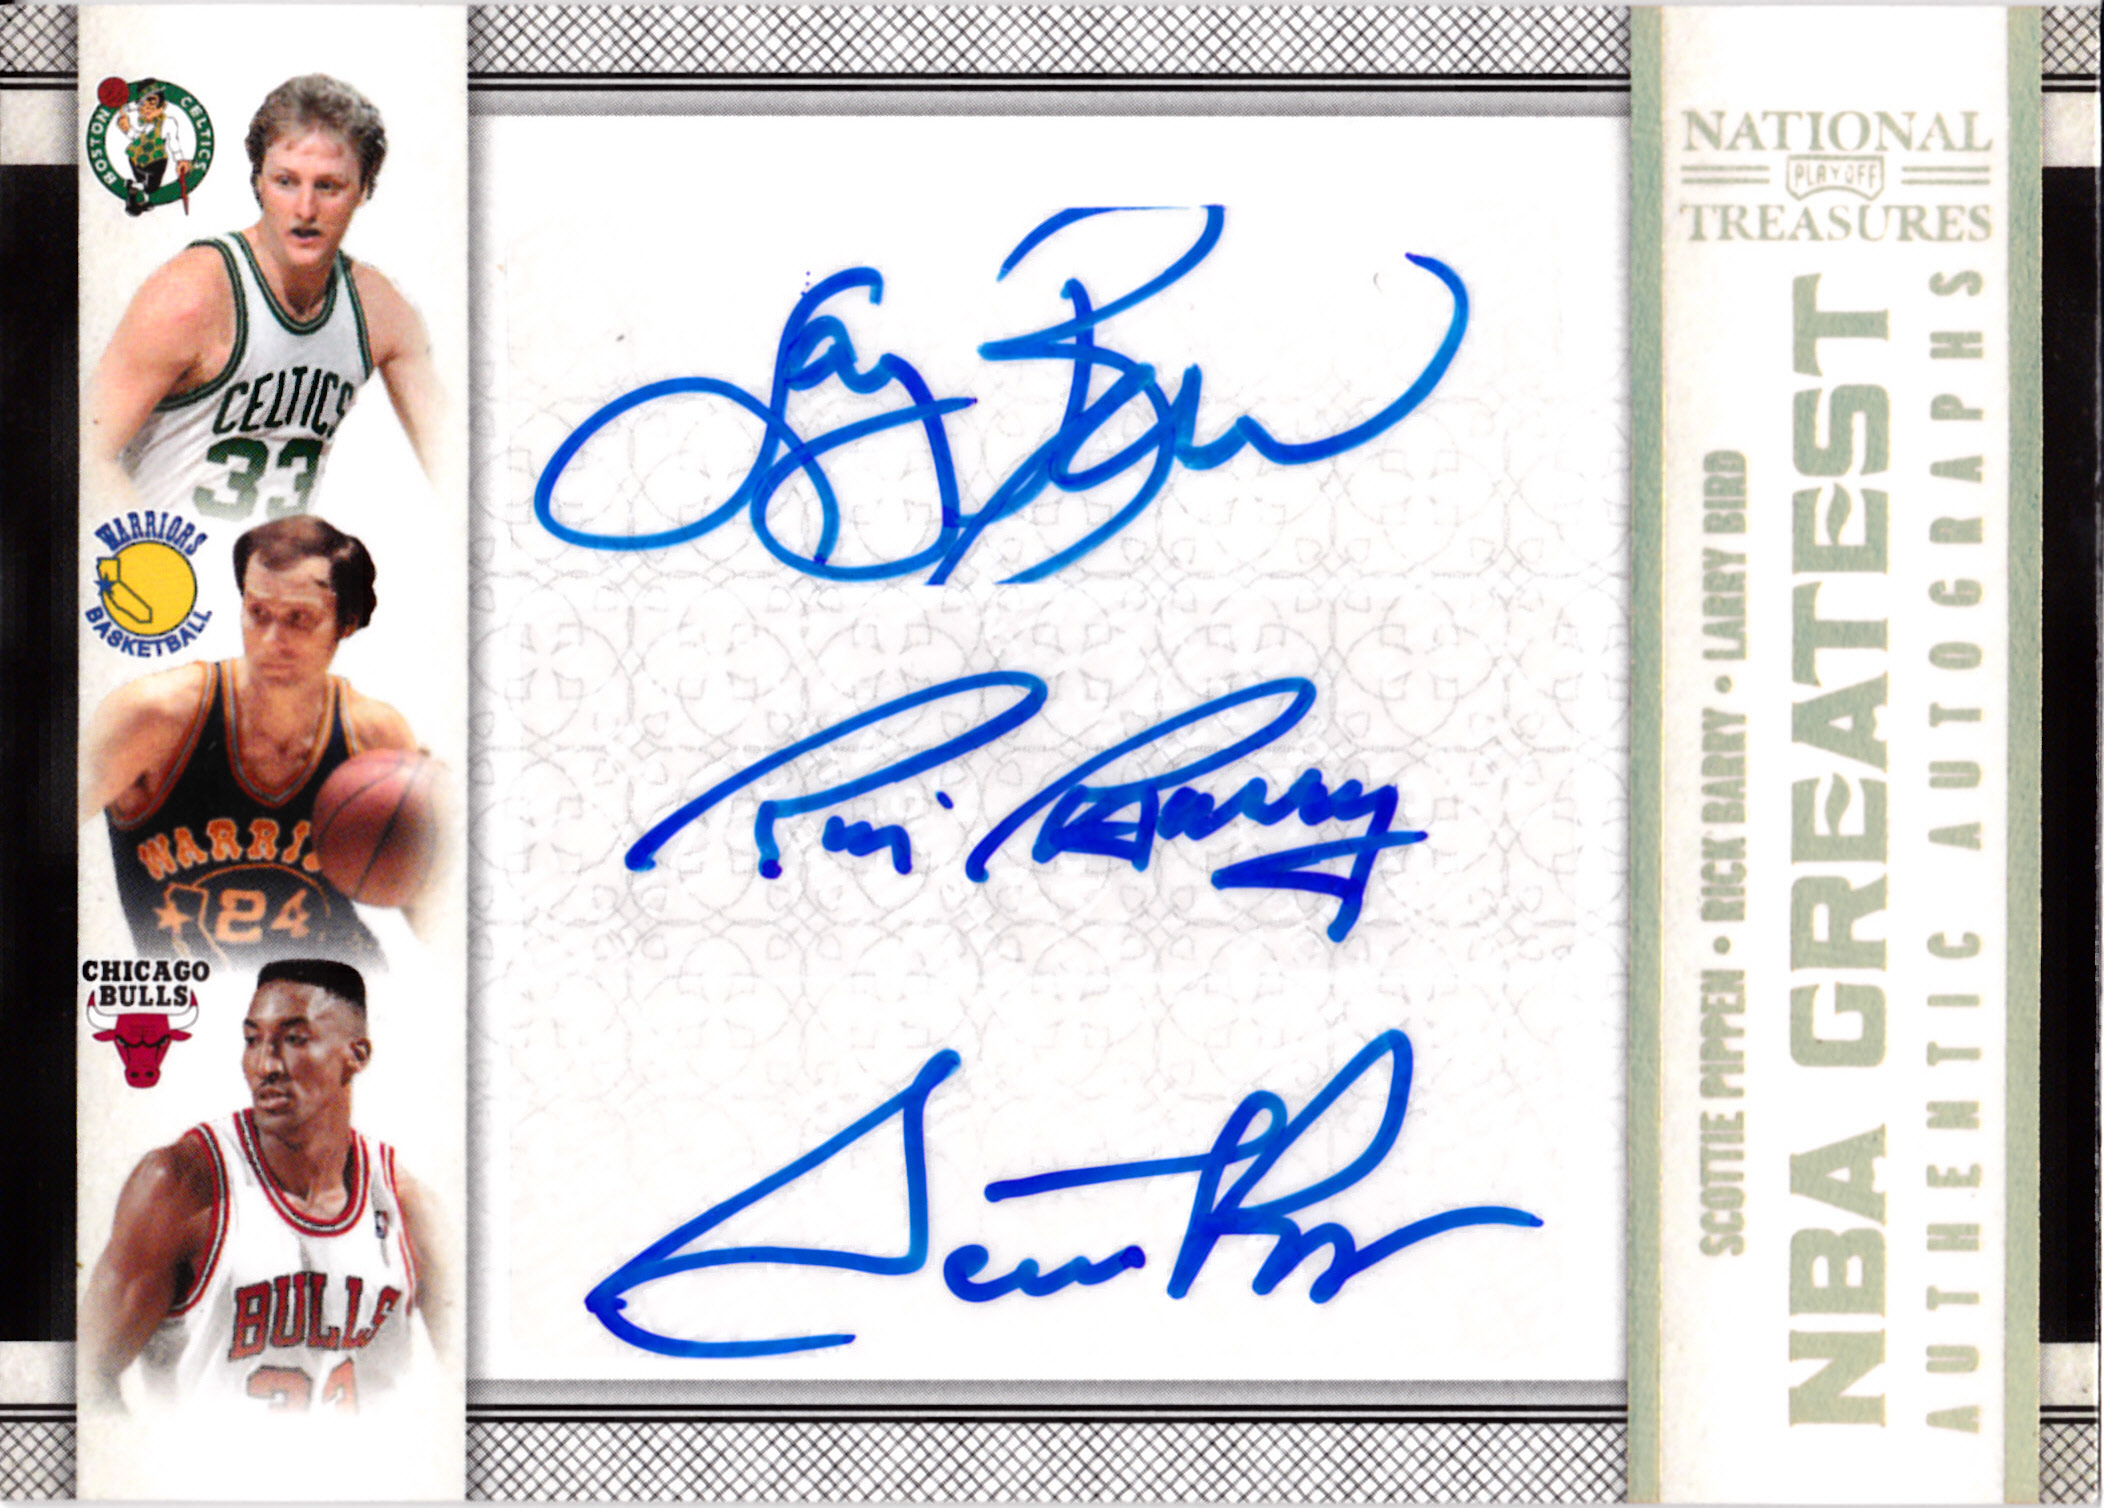 2009-10 Playoff National Treasures NBA Greatest Signature Trios  Pippen Barry Bird 5of5.jpg